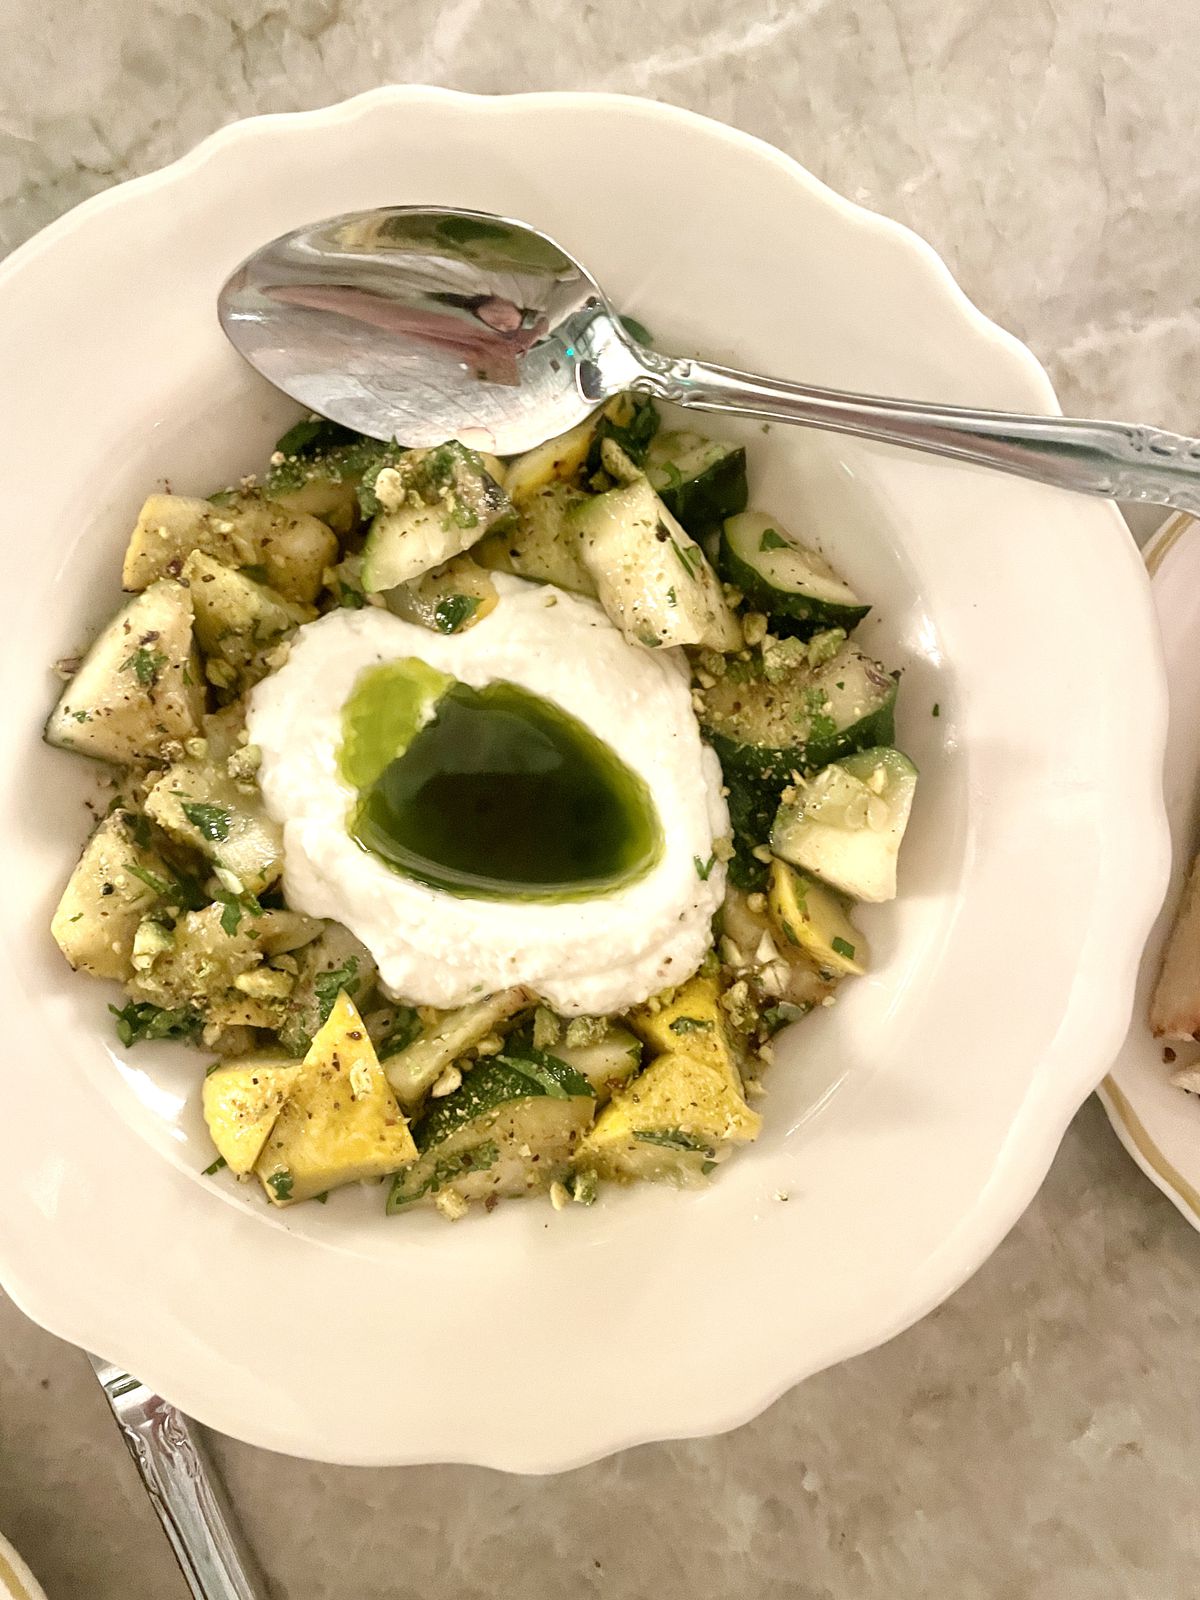 A bowl holds ricotta in the center with a green-infused oil. Around it sits grilled zucchini. A silver spoon is dipped in on one side.